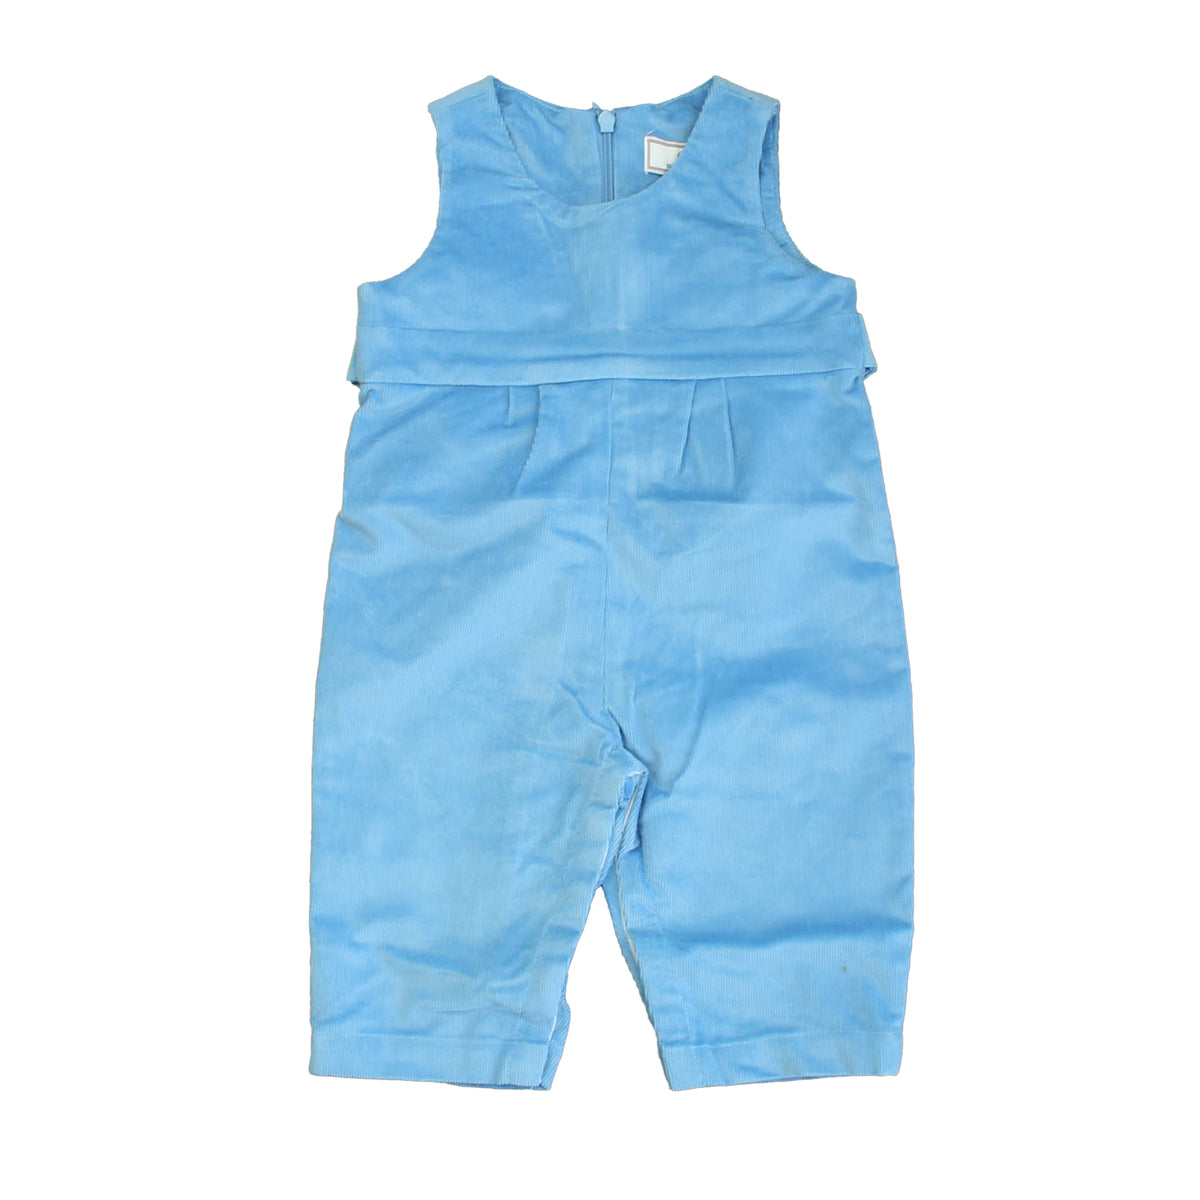 New with Tags: Alaskan Blue Pants size: 6-9 Months -- FINAL SALE